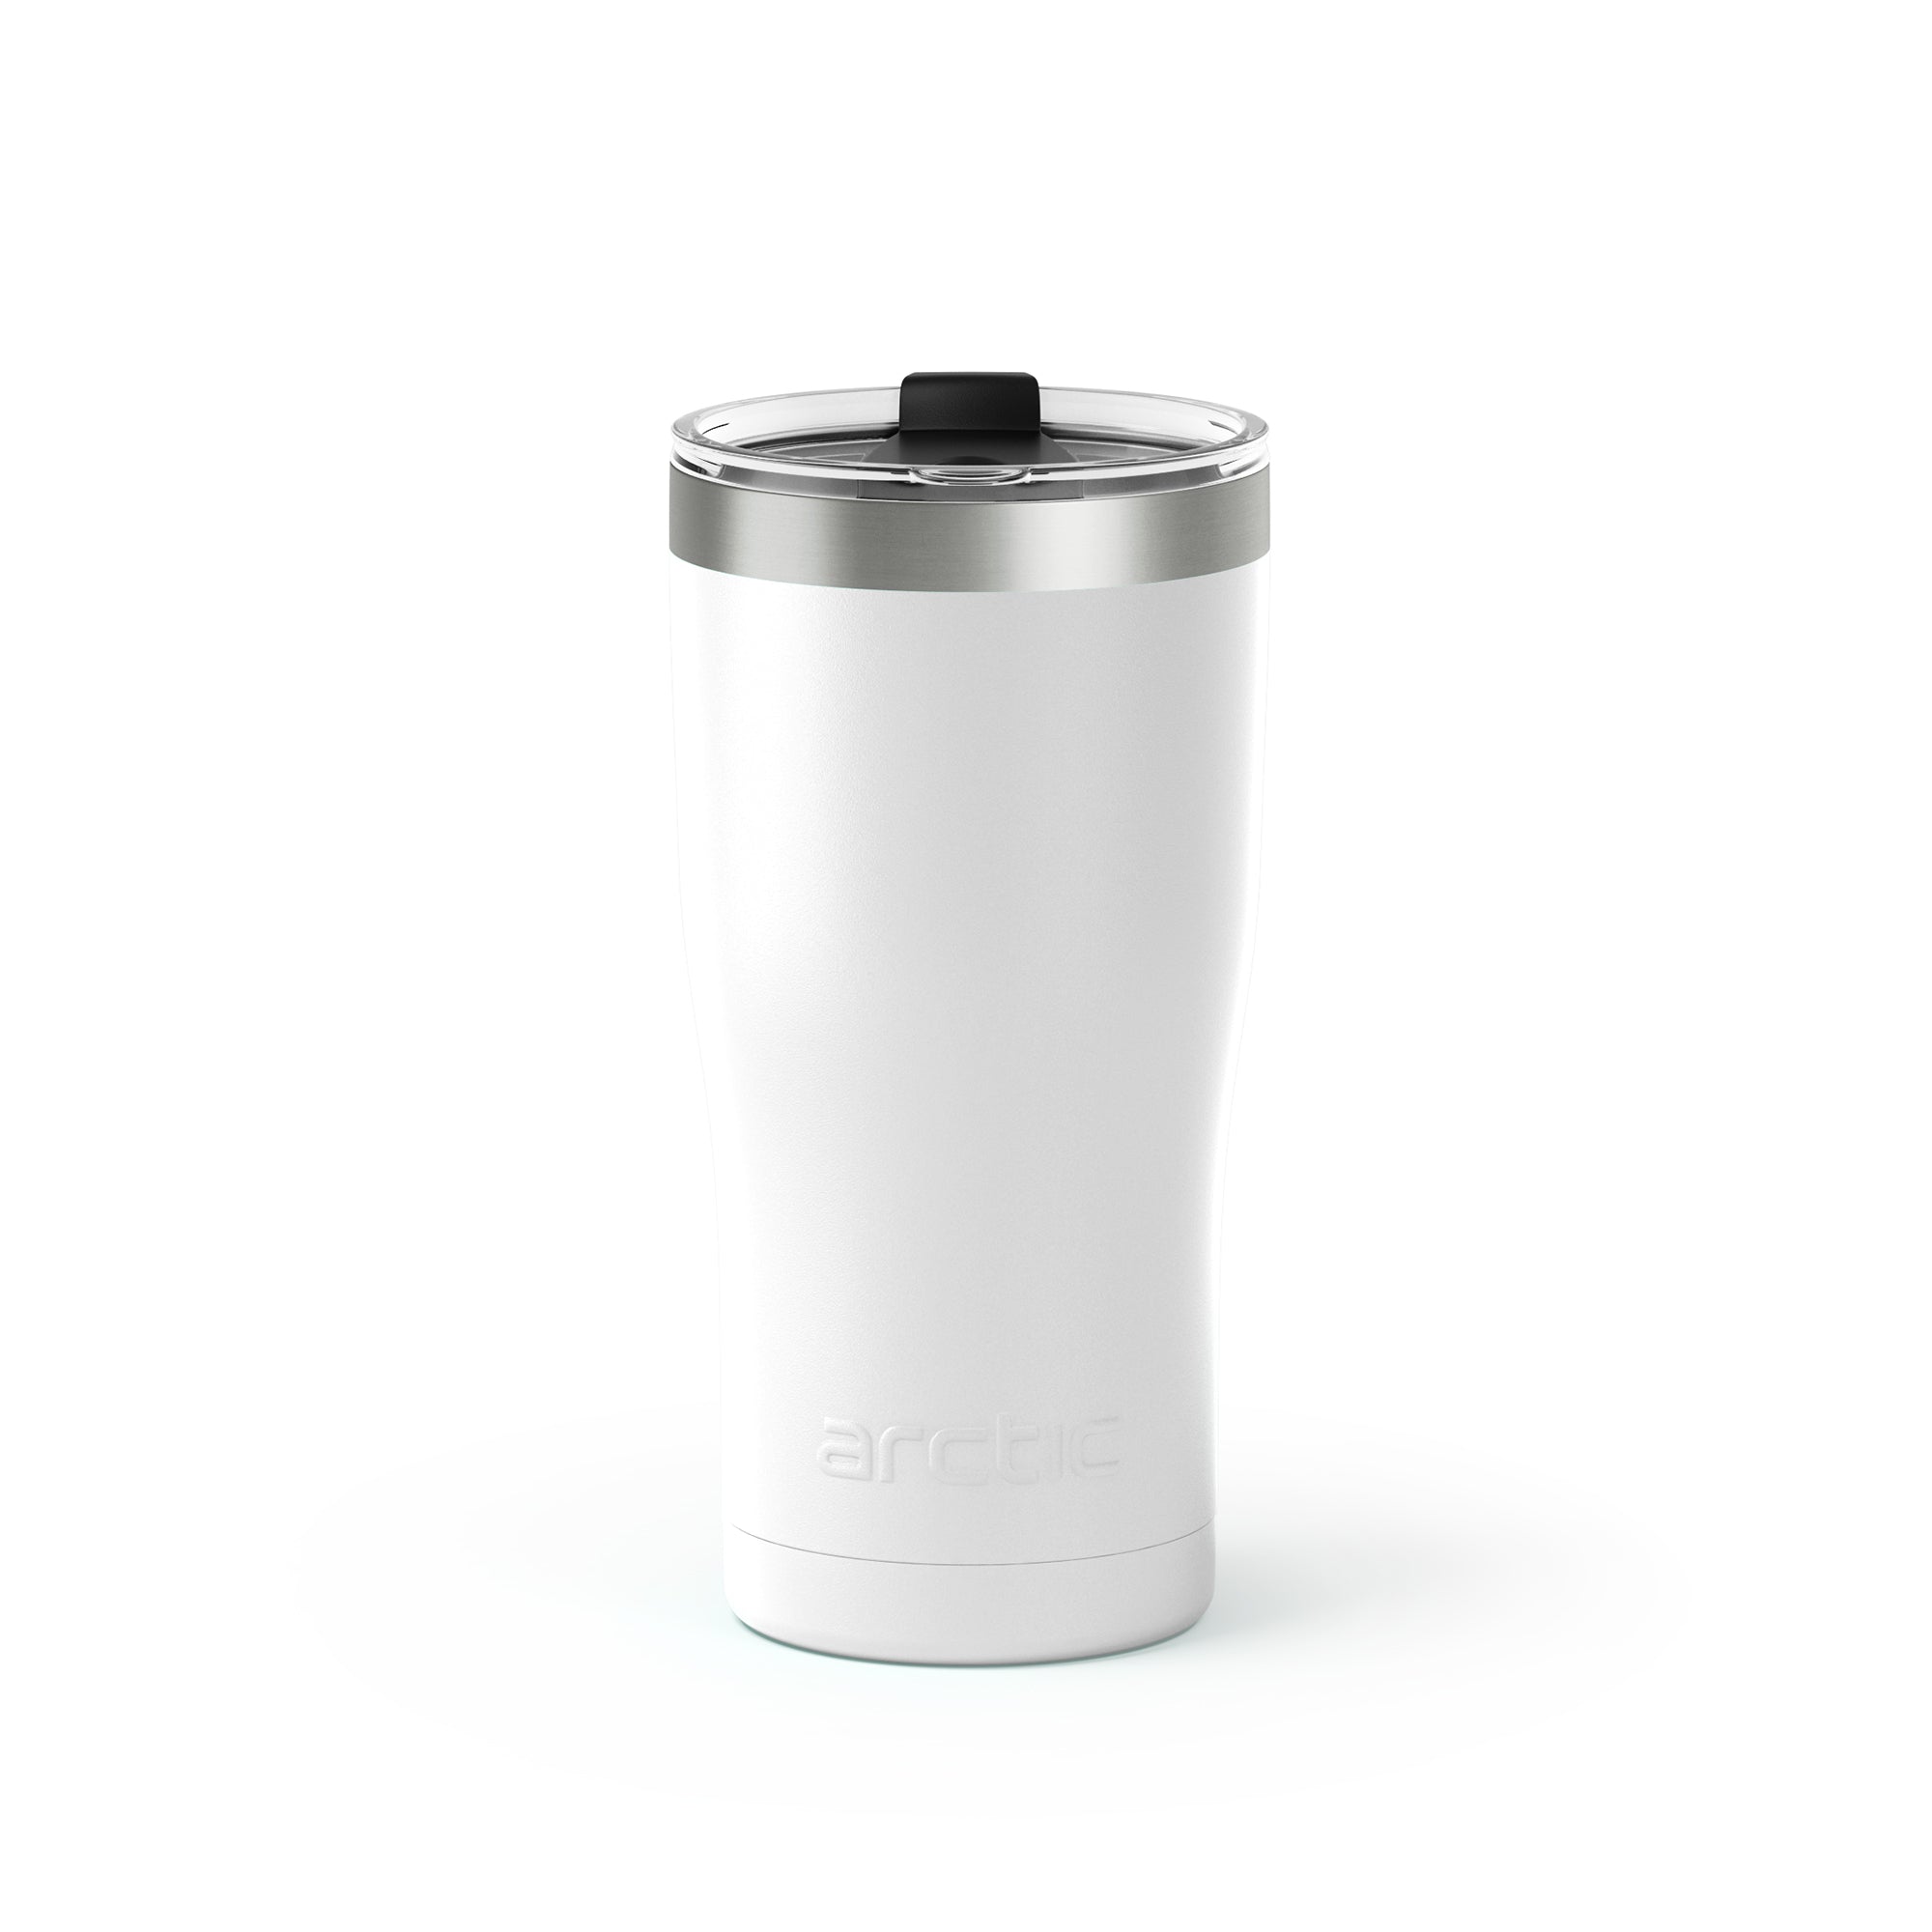 Arctic Tumbler w/ Lid & Straw - 20 oz, Stainless Steel, Matte Red